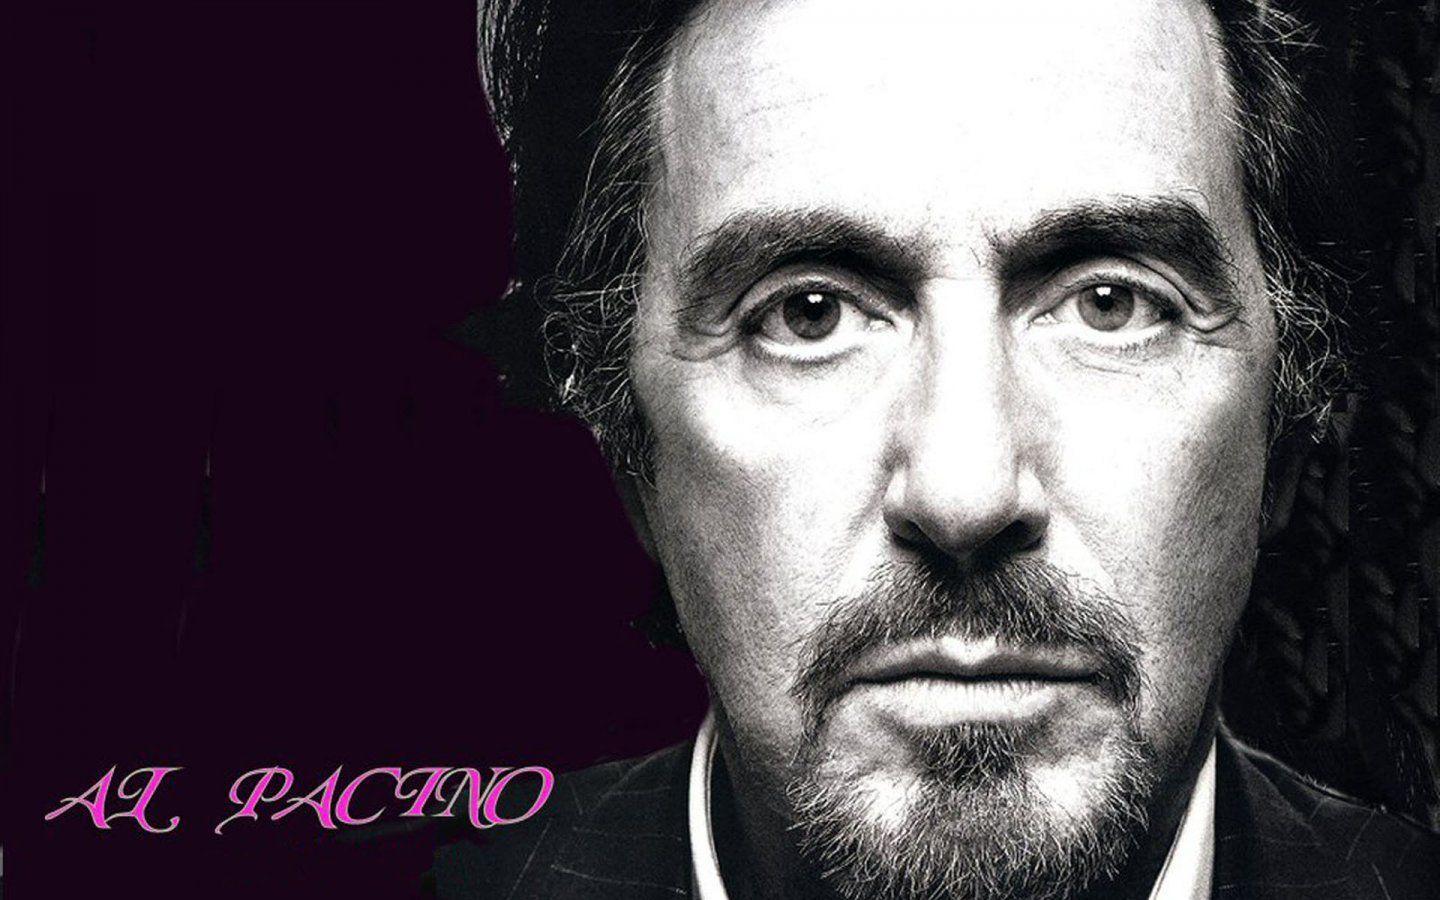 HD Wallpaper Al Pacino high quality and definition